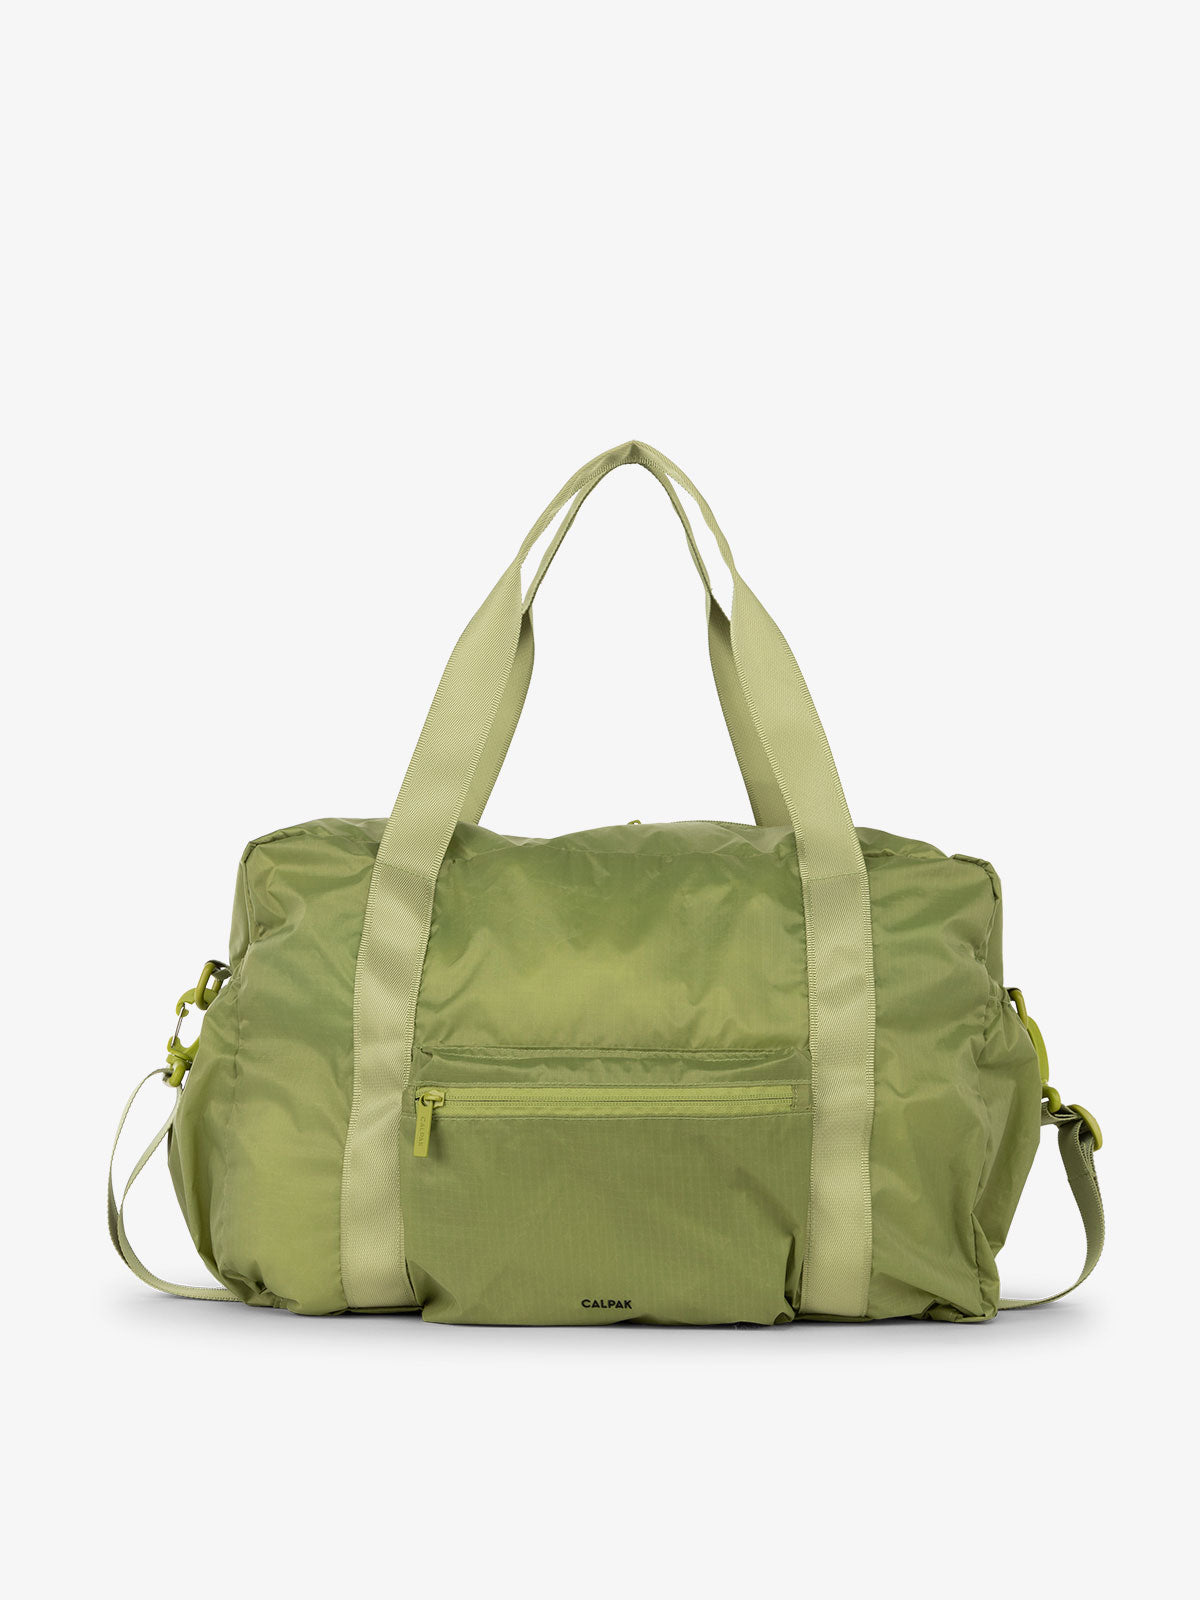 CALPAK Compakt duffel bag with removable crossbody strap and water resistant fabric in palm